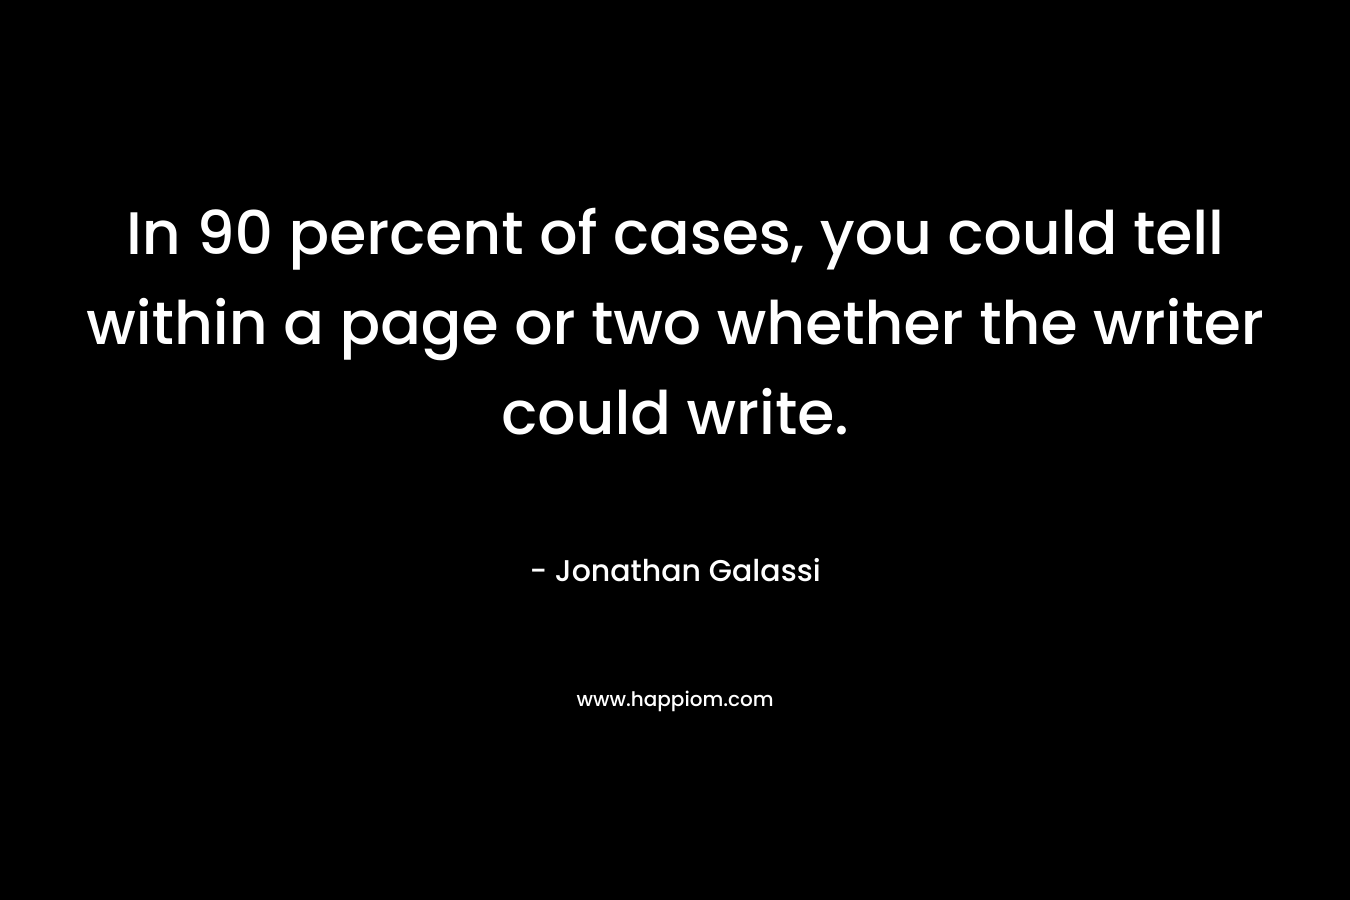 In 90 percent of cases, you could tell within a page or two whether the writer could write. – Jonathan Galassi